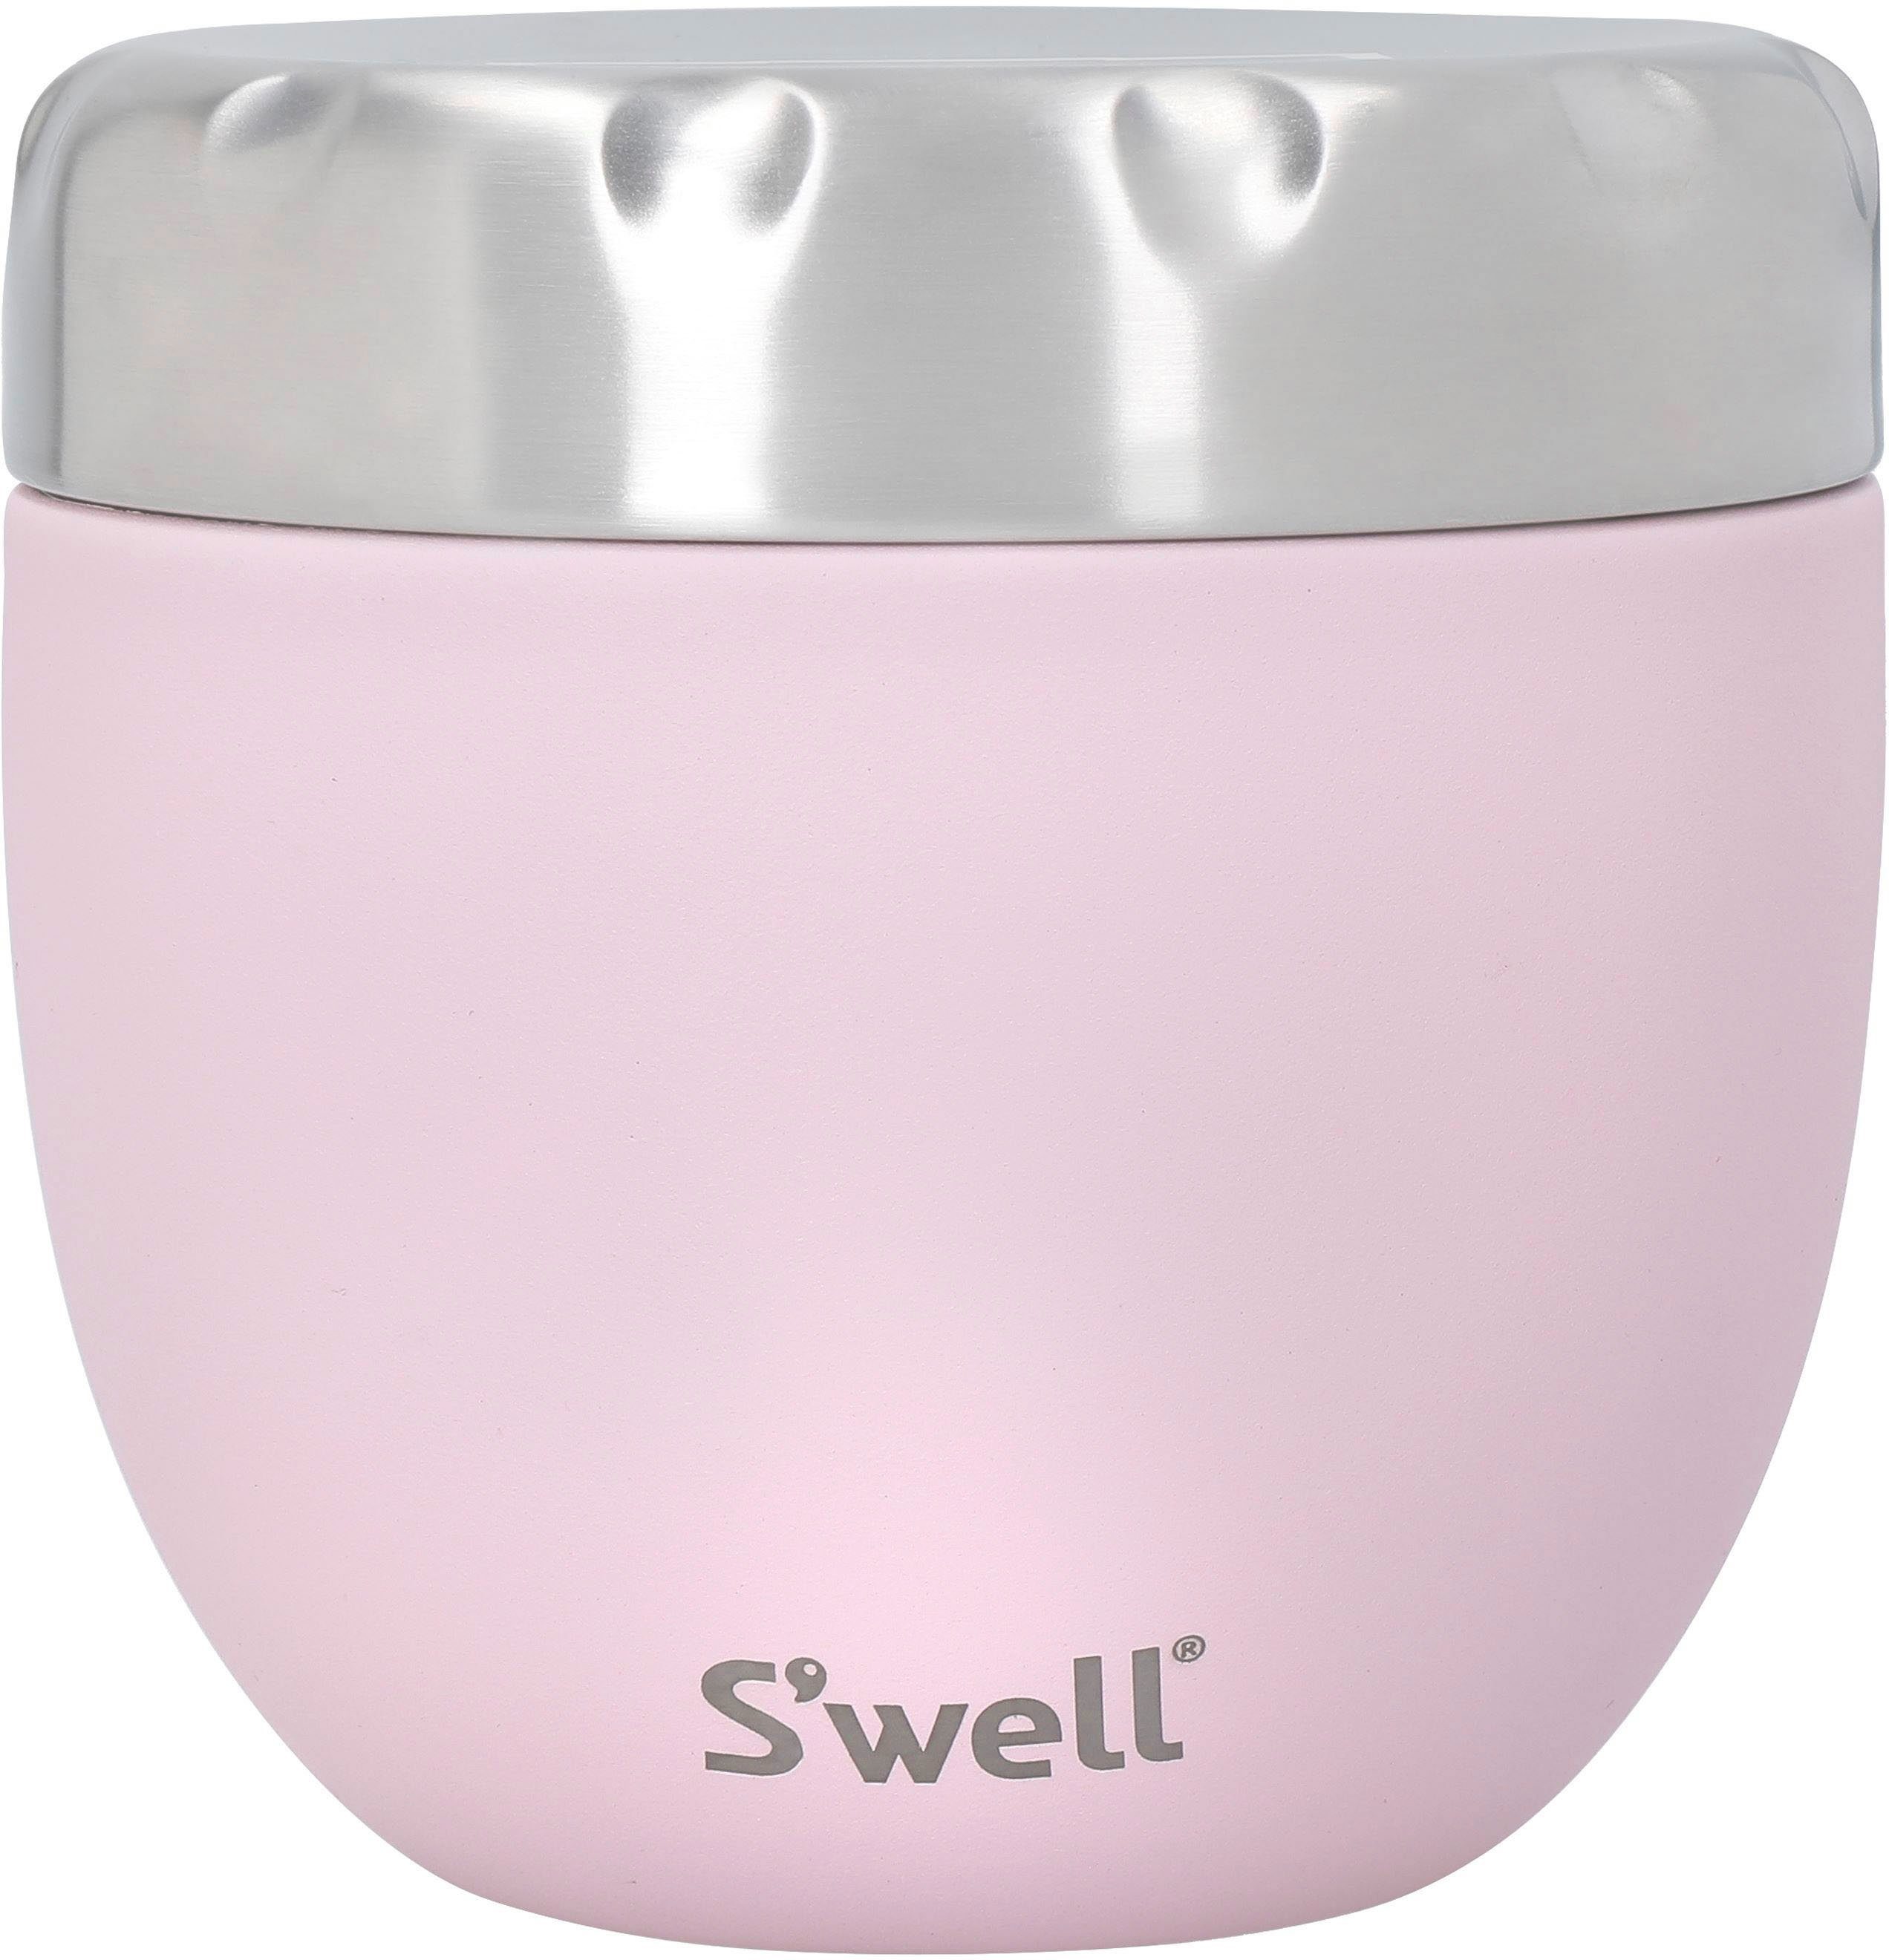 S'well Salad Bowl Kit in Pink Topaz